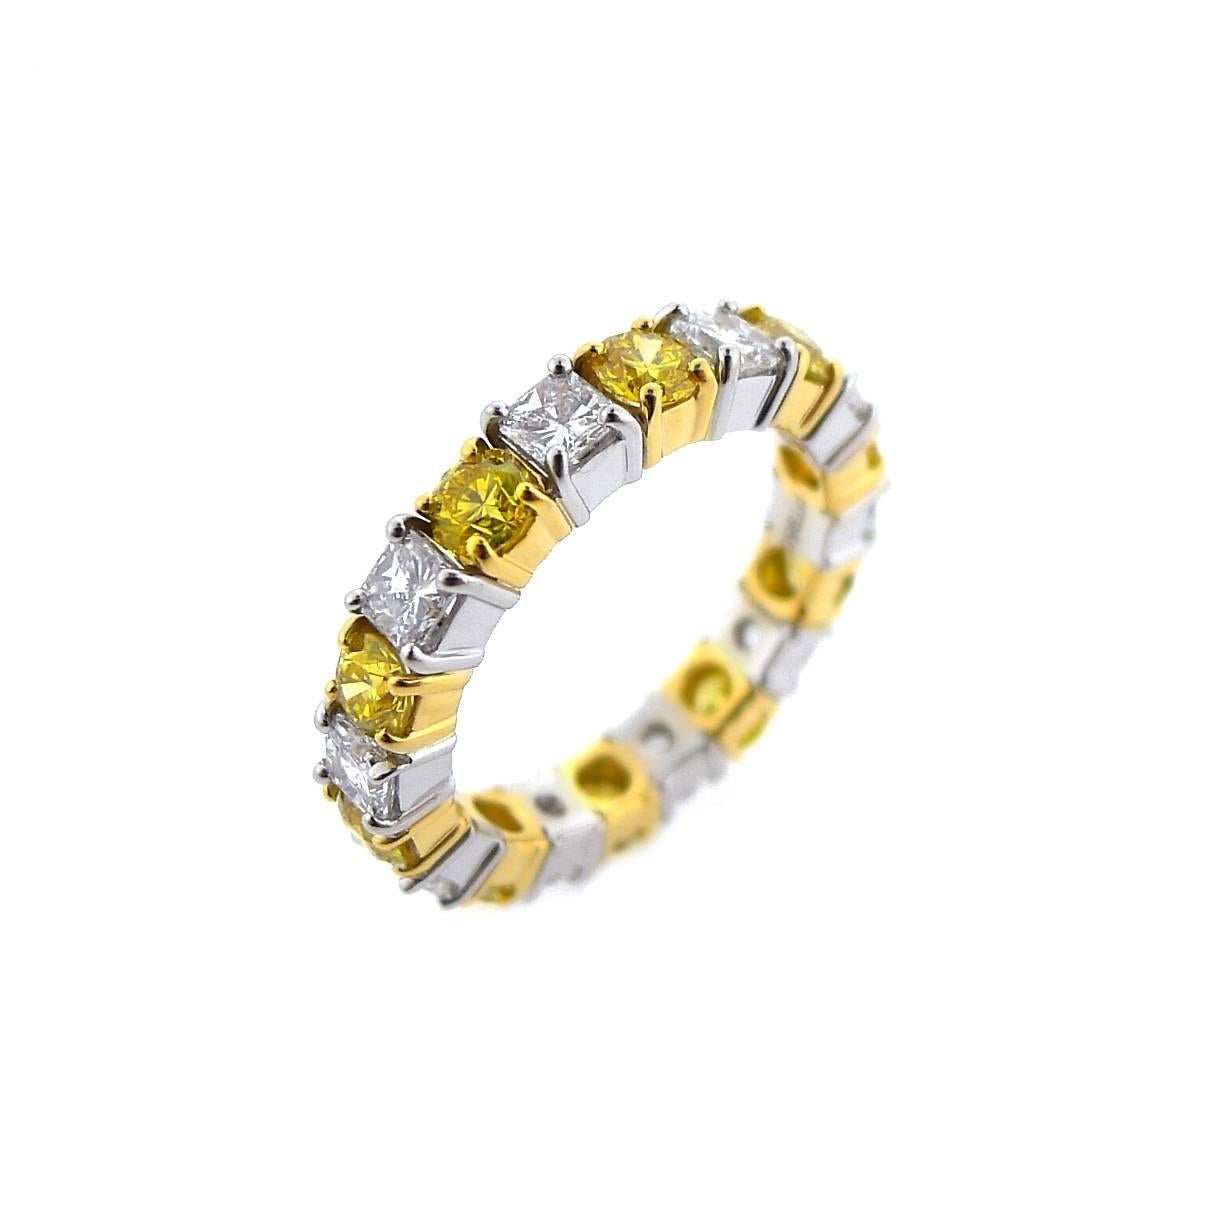 18K yellow gold and platinum, 10 radiant cut white diamonds totaling 1.50 carats, E/F color, VS clarity, 10 round fancy vivid yellow diamonds totaling 1.54 carats, VS clarity.